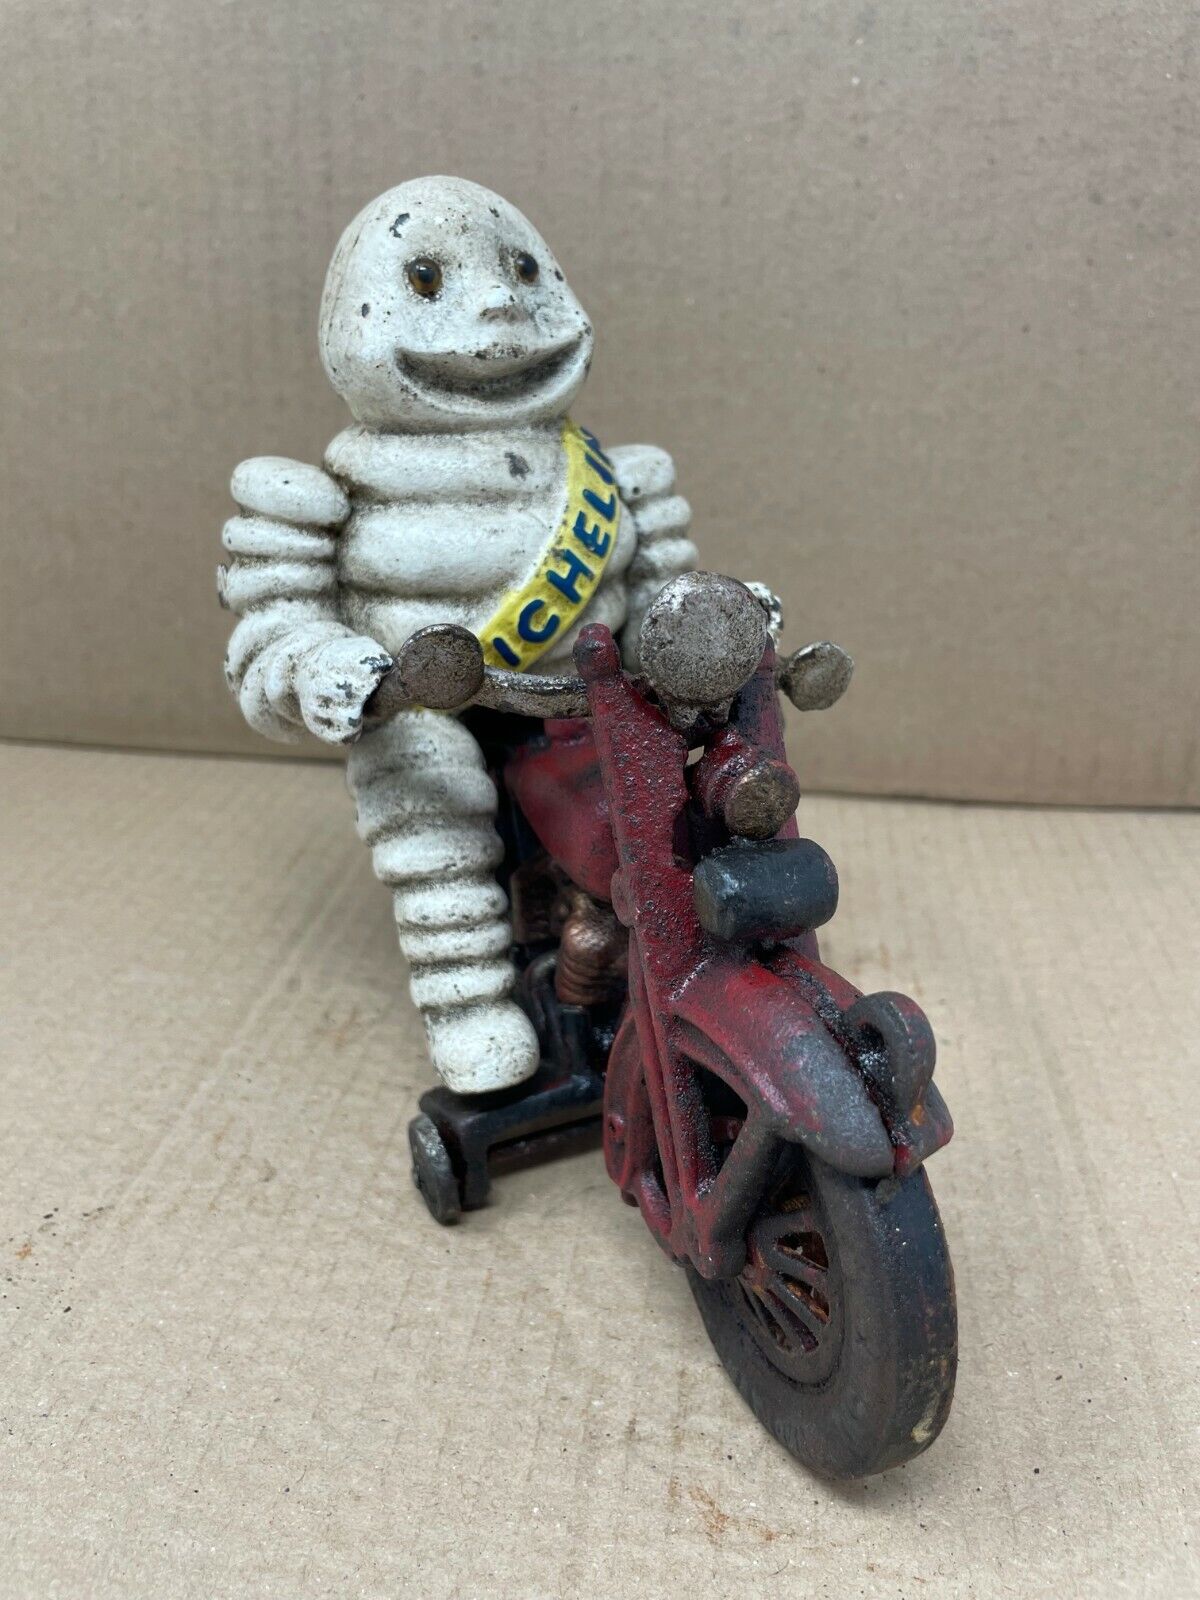 Cast Iron Michelin Man Tire Guy Figure on a Motorcycle